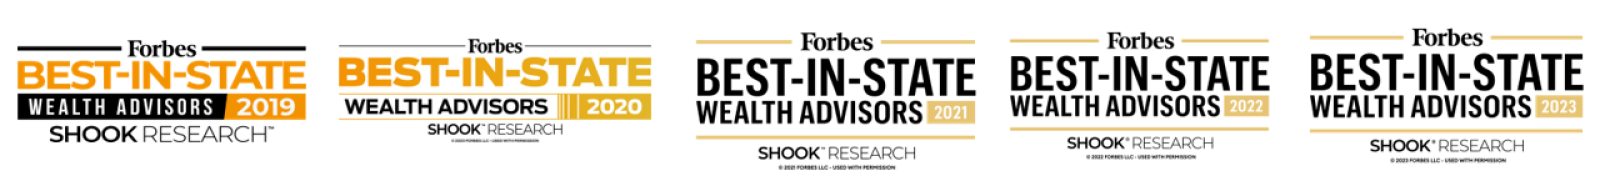 Forbes Best-In-State Wealth Advisor Gary Williams from Williams Asset Management 